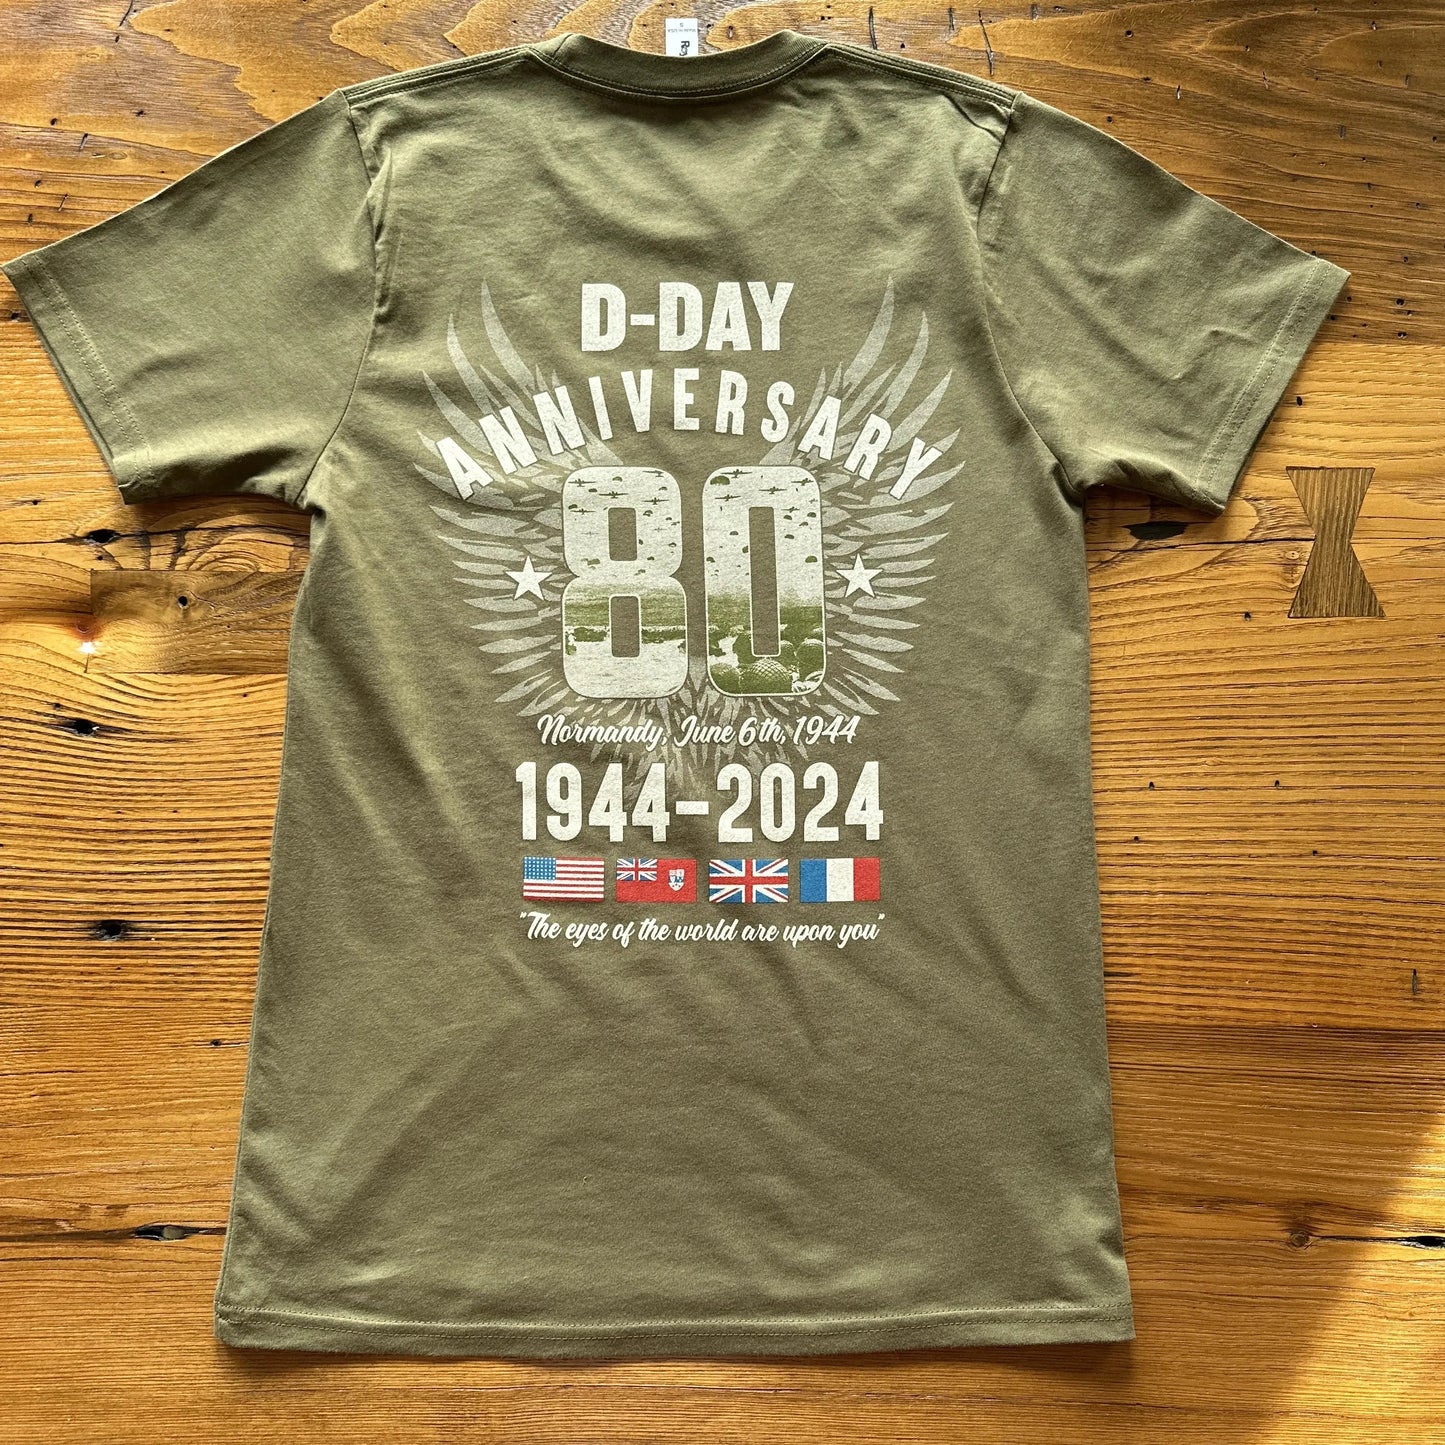 D-Day 80th Anniversary Made in America Shirt